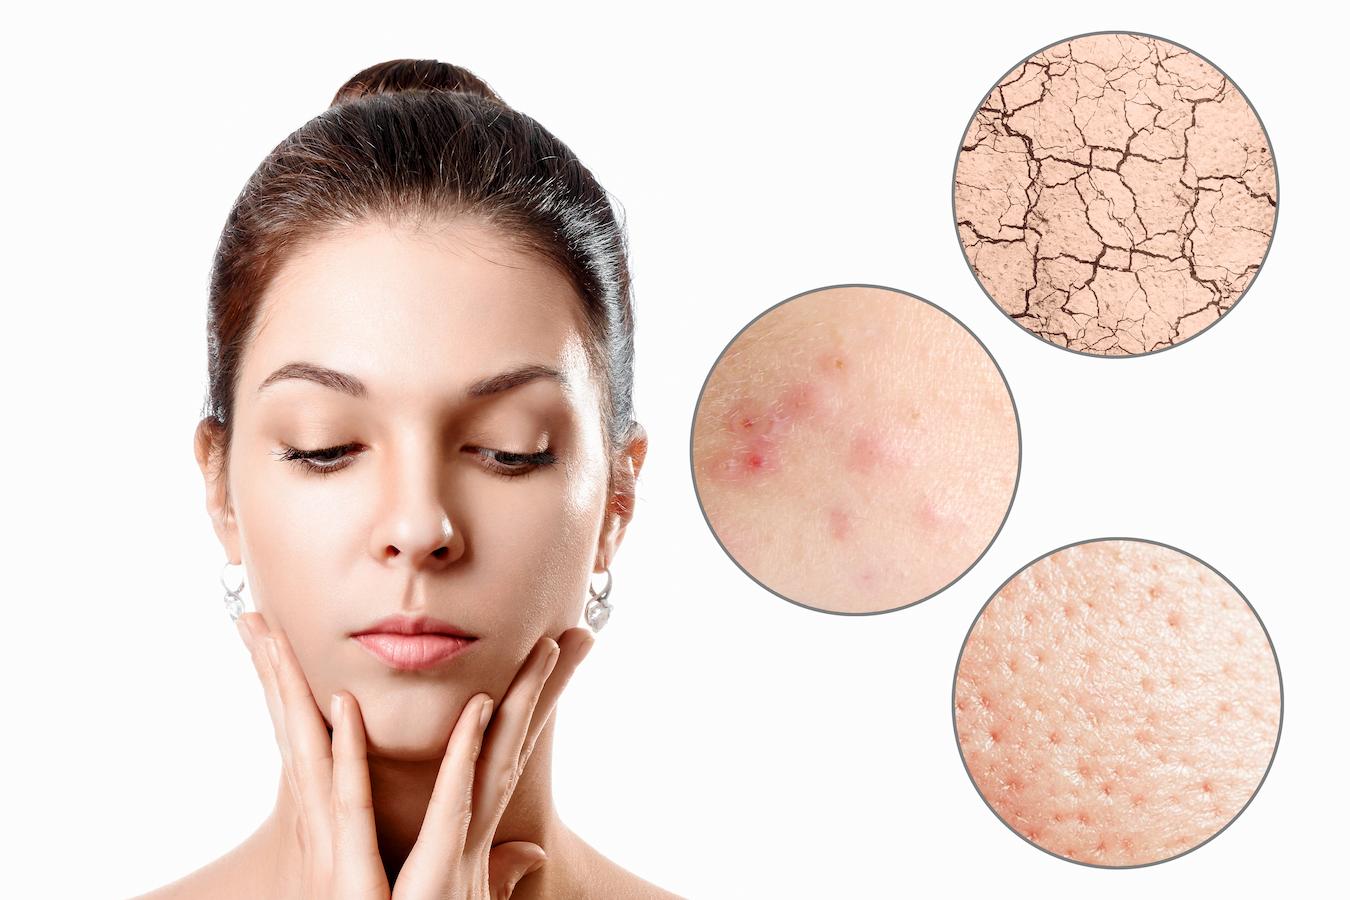 Skin care can prevent us from blemishes acne and aging